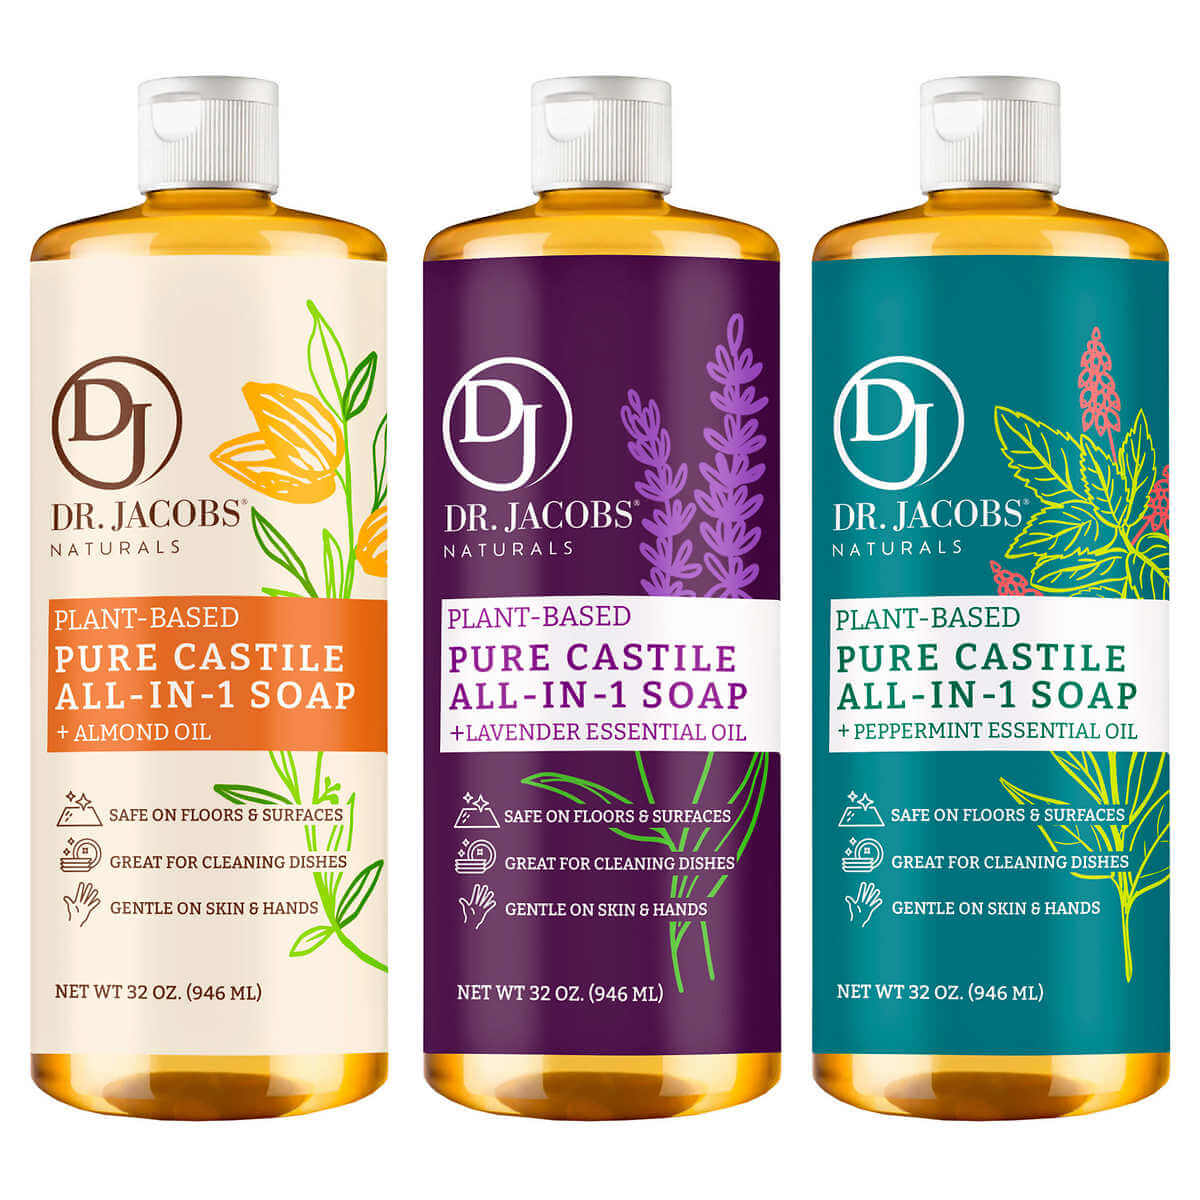 Dr. Jacobs Naturals Pure Castile Soap Variety Pack - 32 oz - 3-count